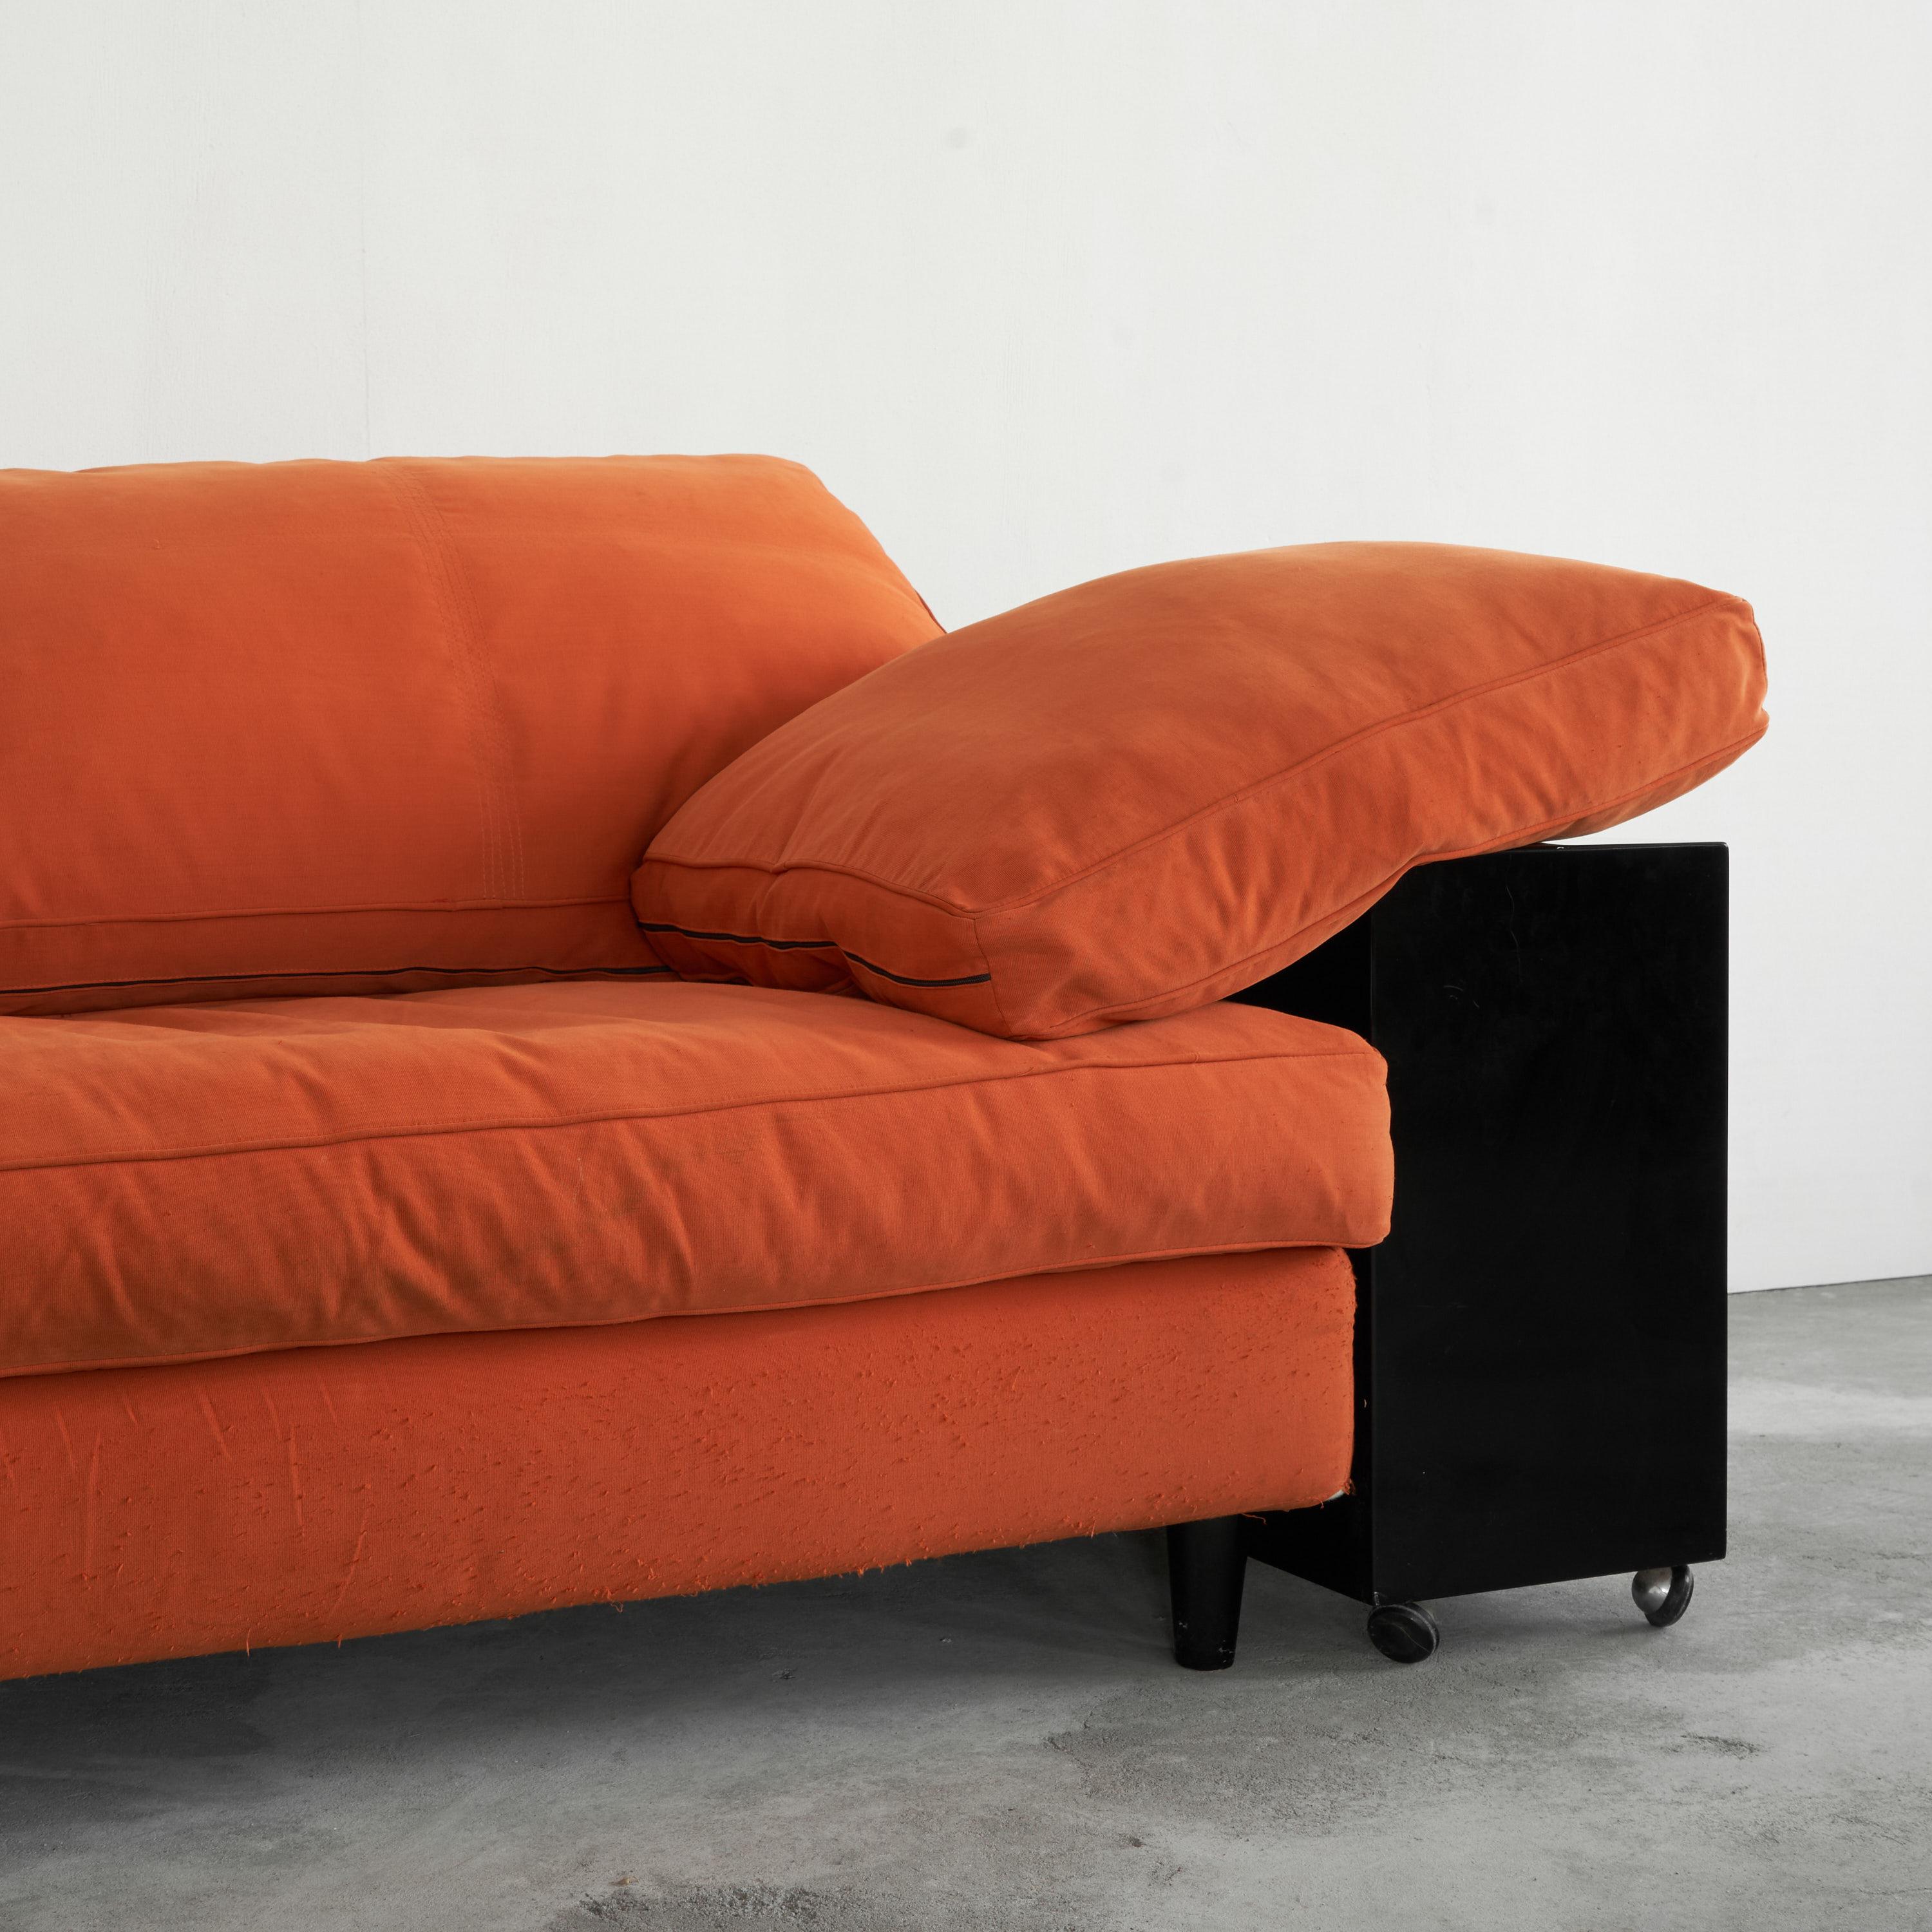 European Eileen Gray 'Lota' Sofa in Black Lacquer and Orange Fabric 1980s For Sale